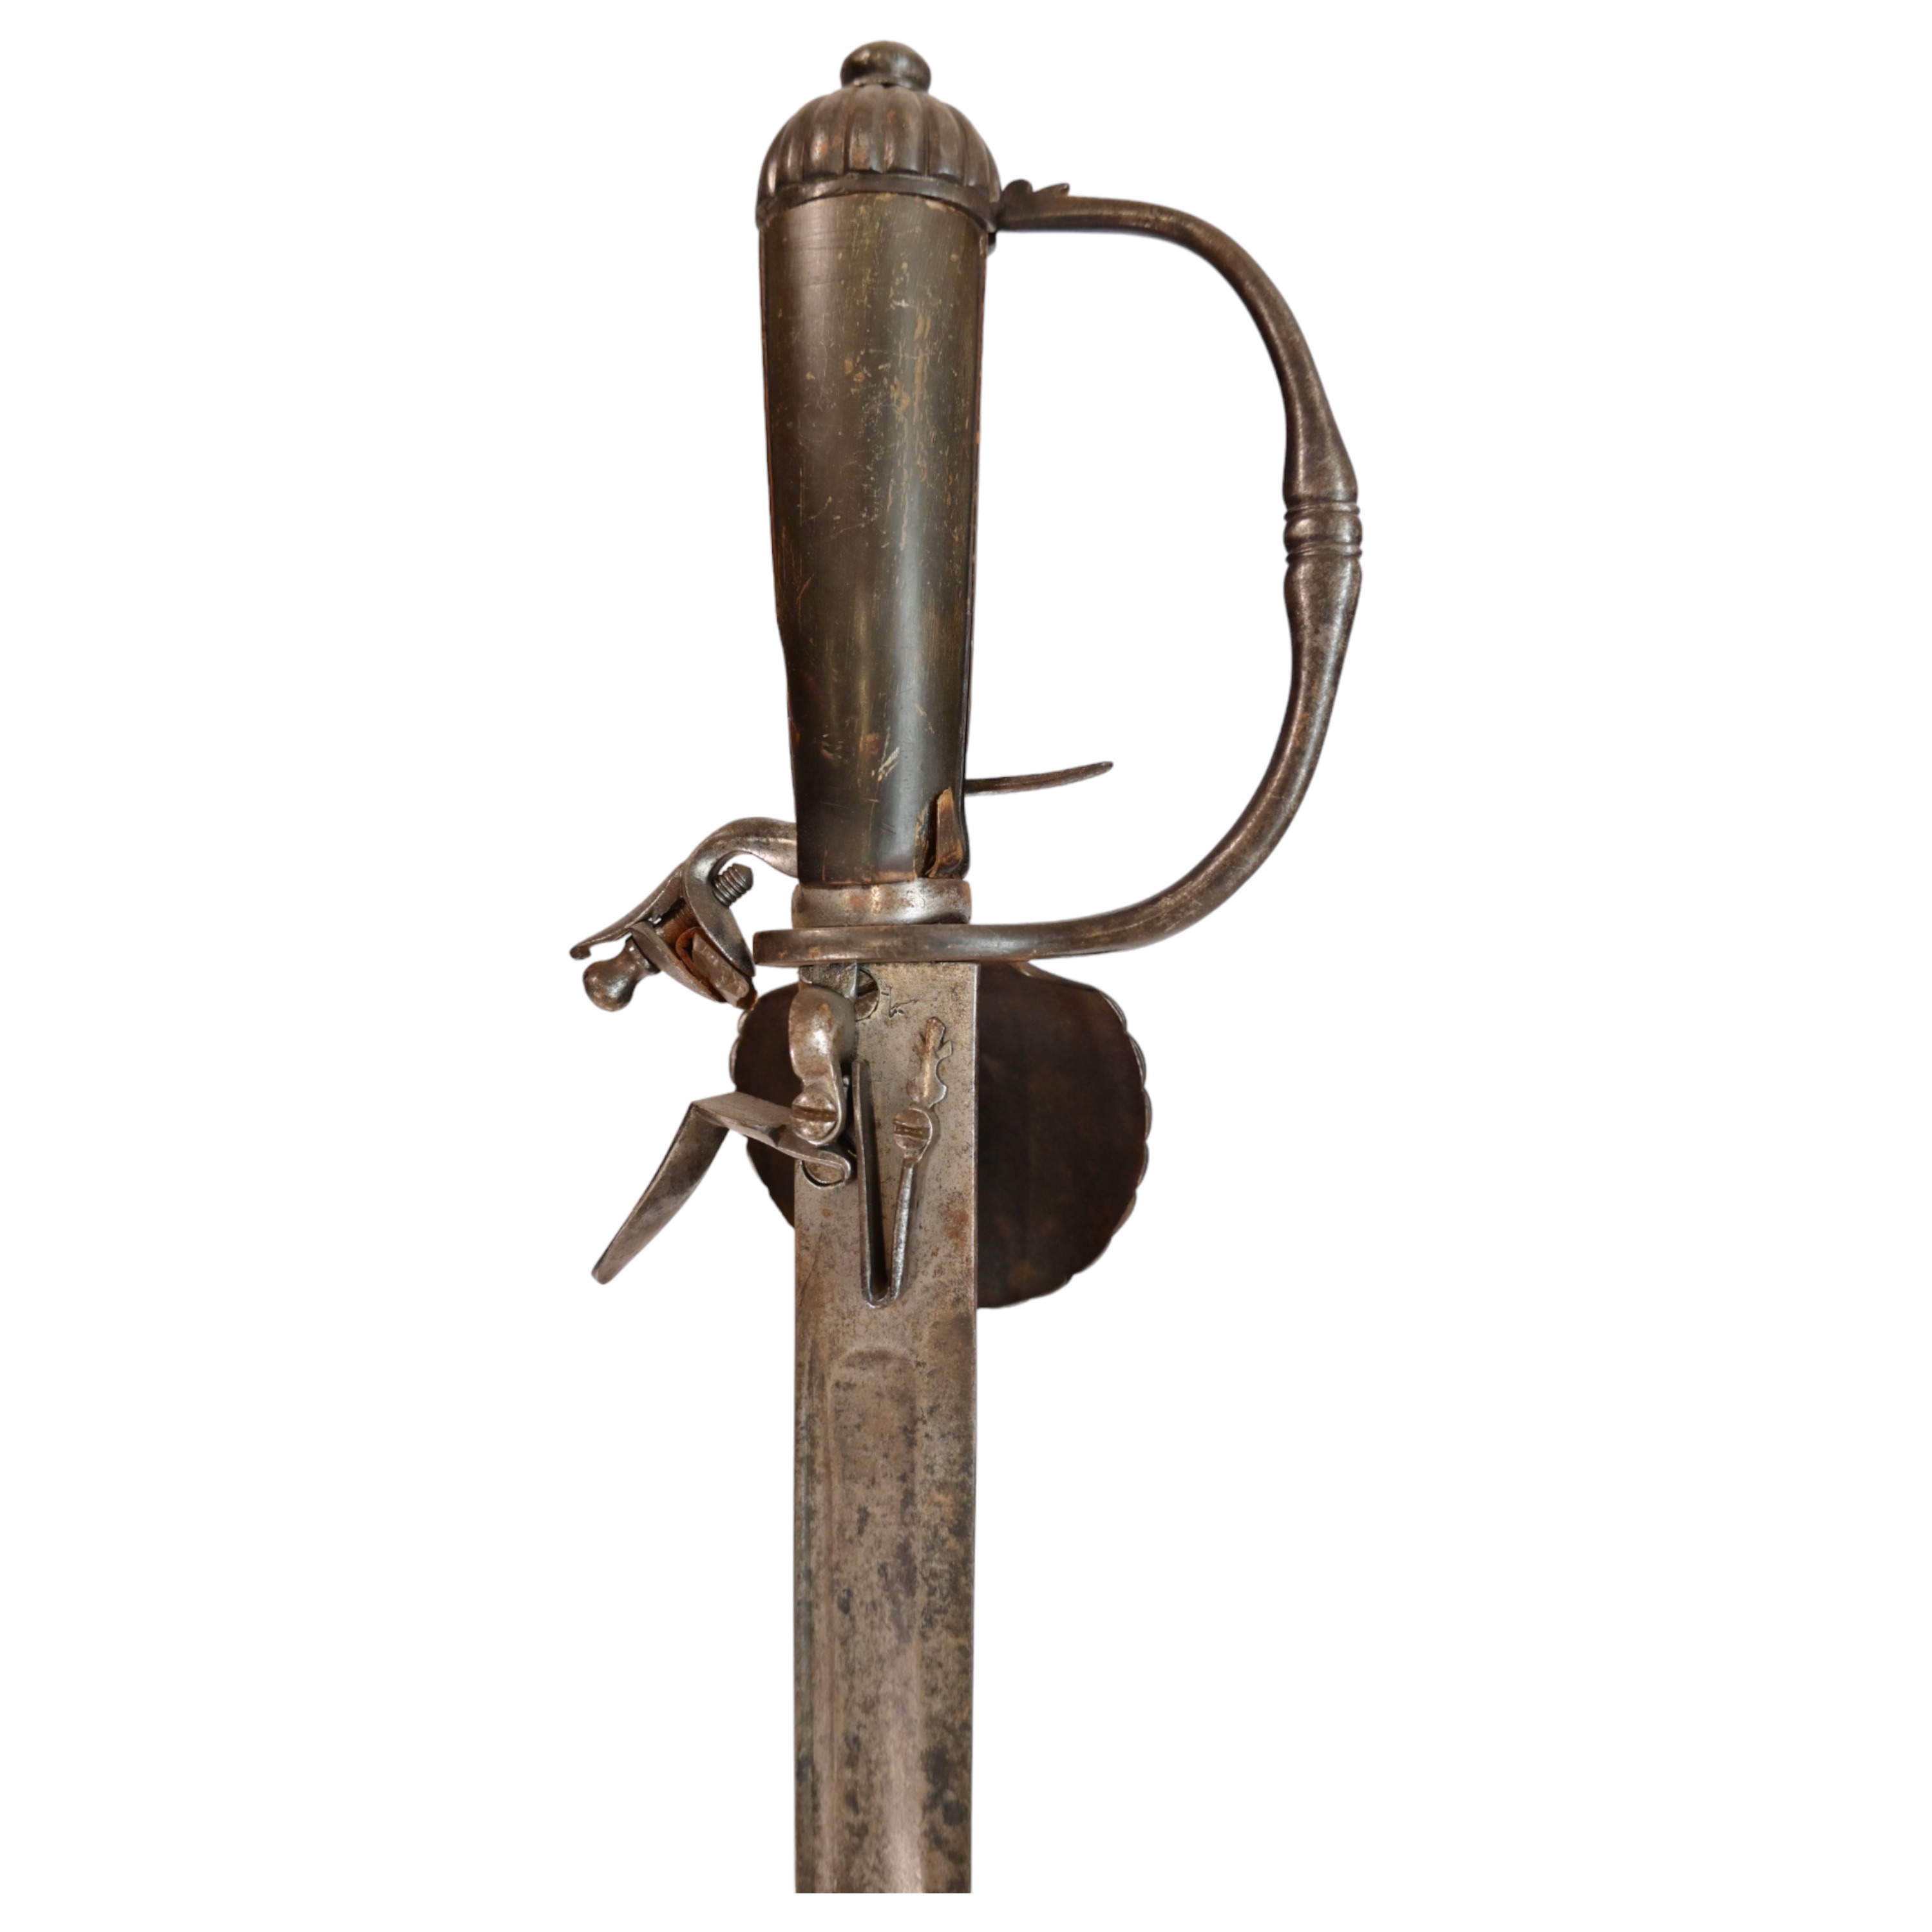 A FLINT LOCK HUNTING SWORD PISTOL WITH SHELL GUARD, IN THE ENGLISH TASTE, LAST HALF 18TH CENTURY. - Image 4 of 13